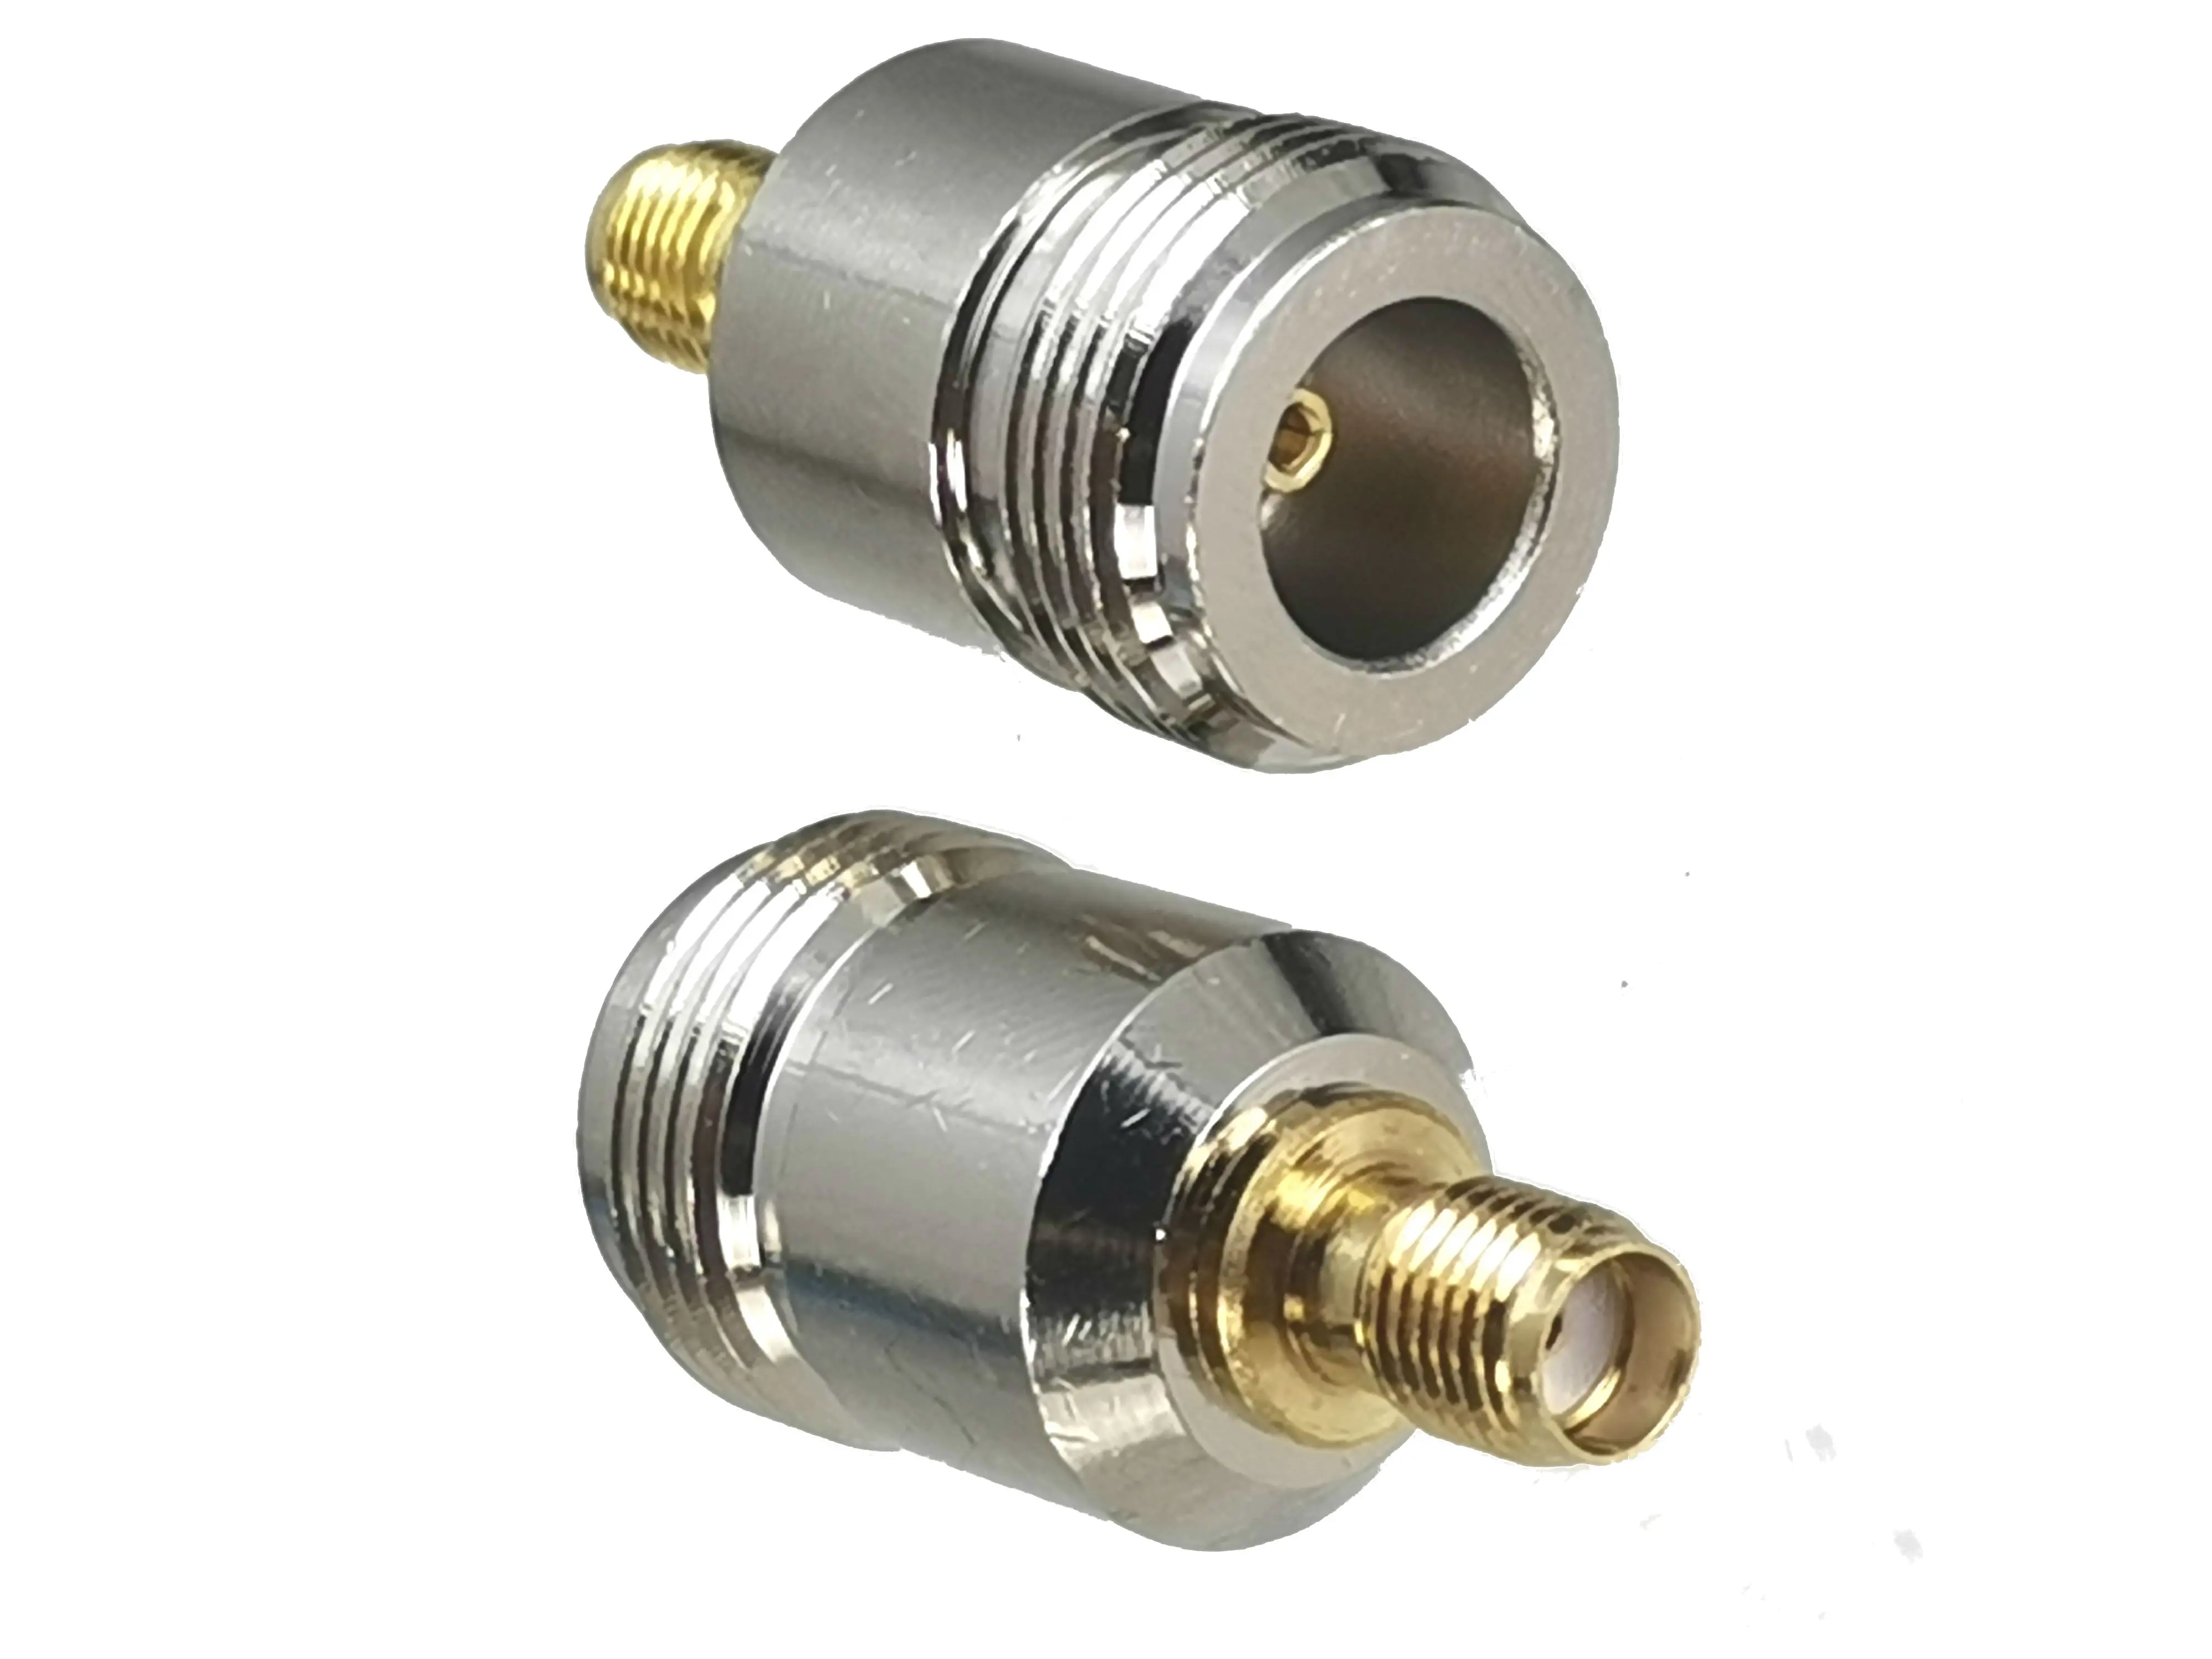 

1pcs Connector Adapter SMA Female Jack to N Female Jack RF Coaxial Converter Straight New